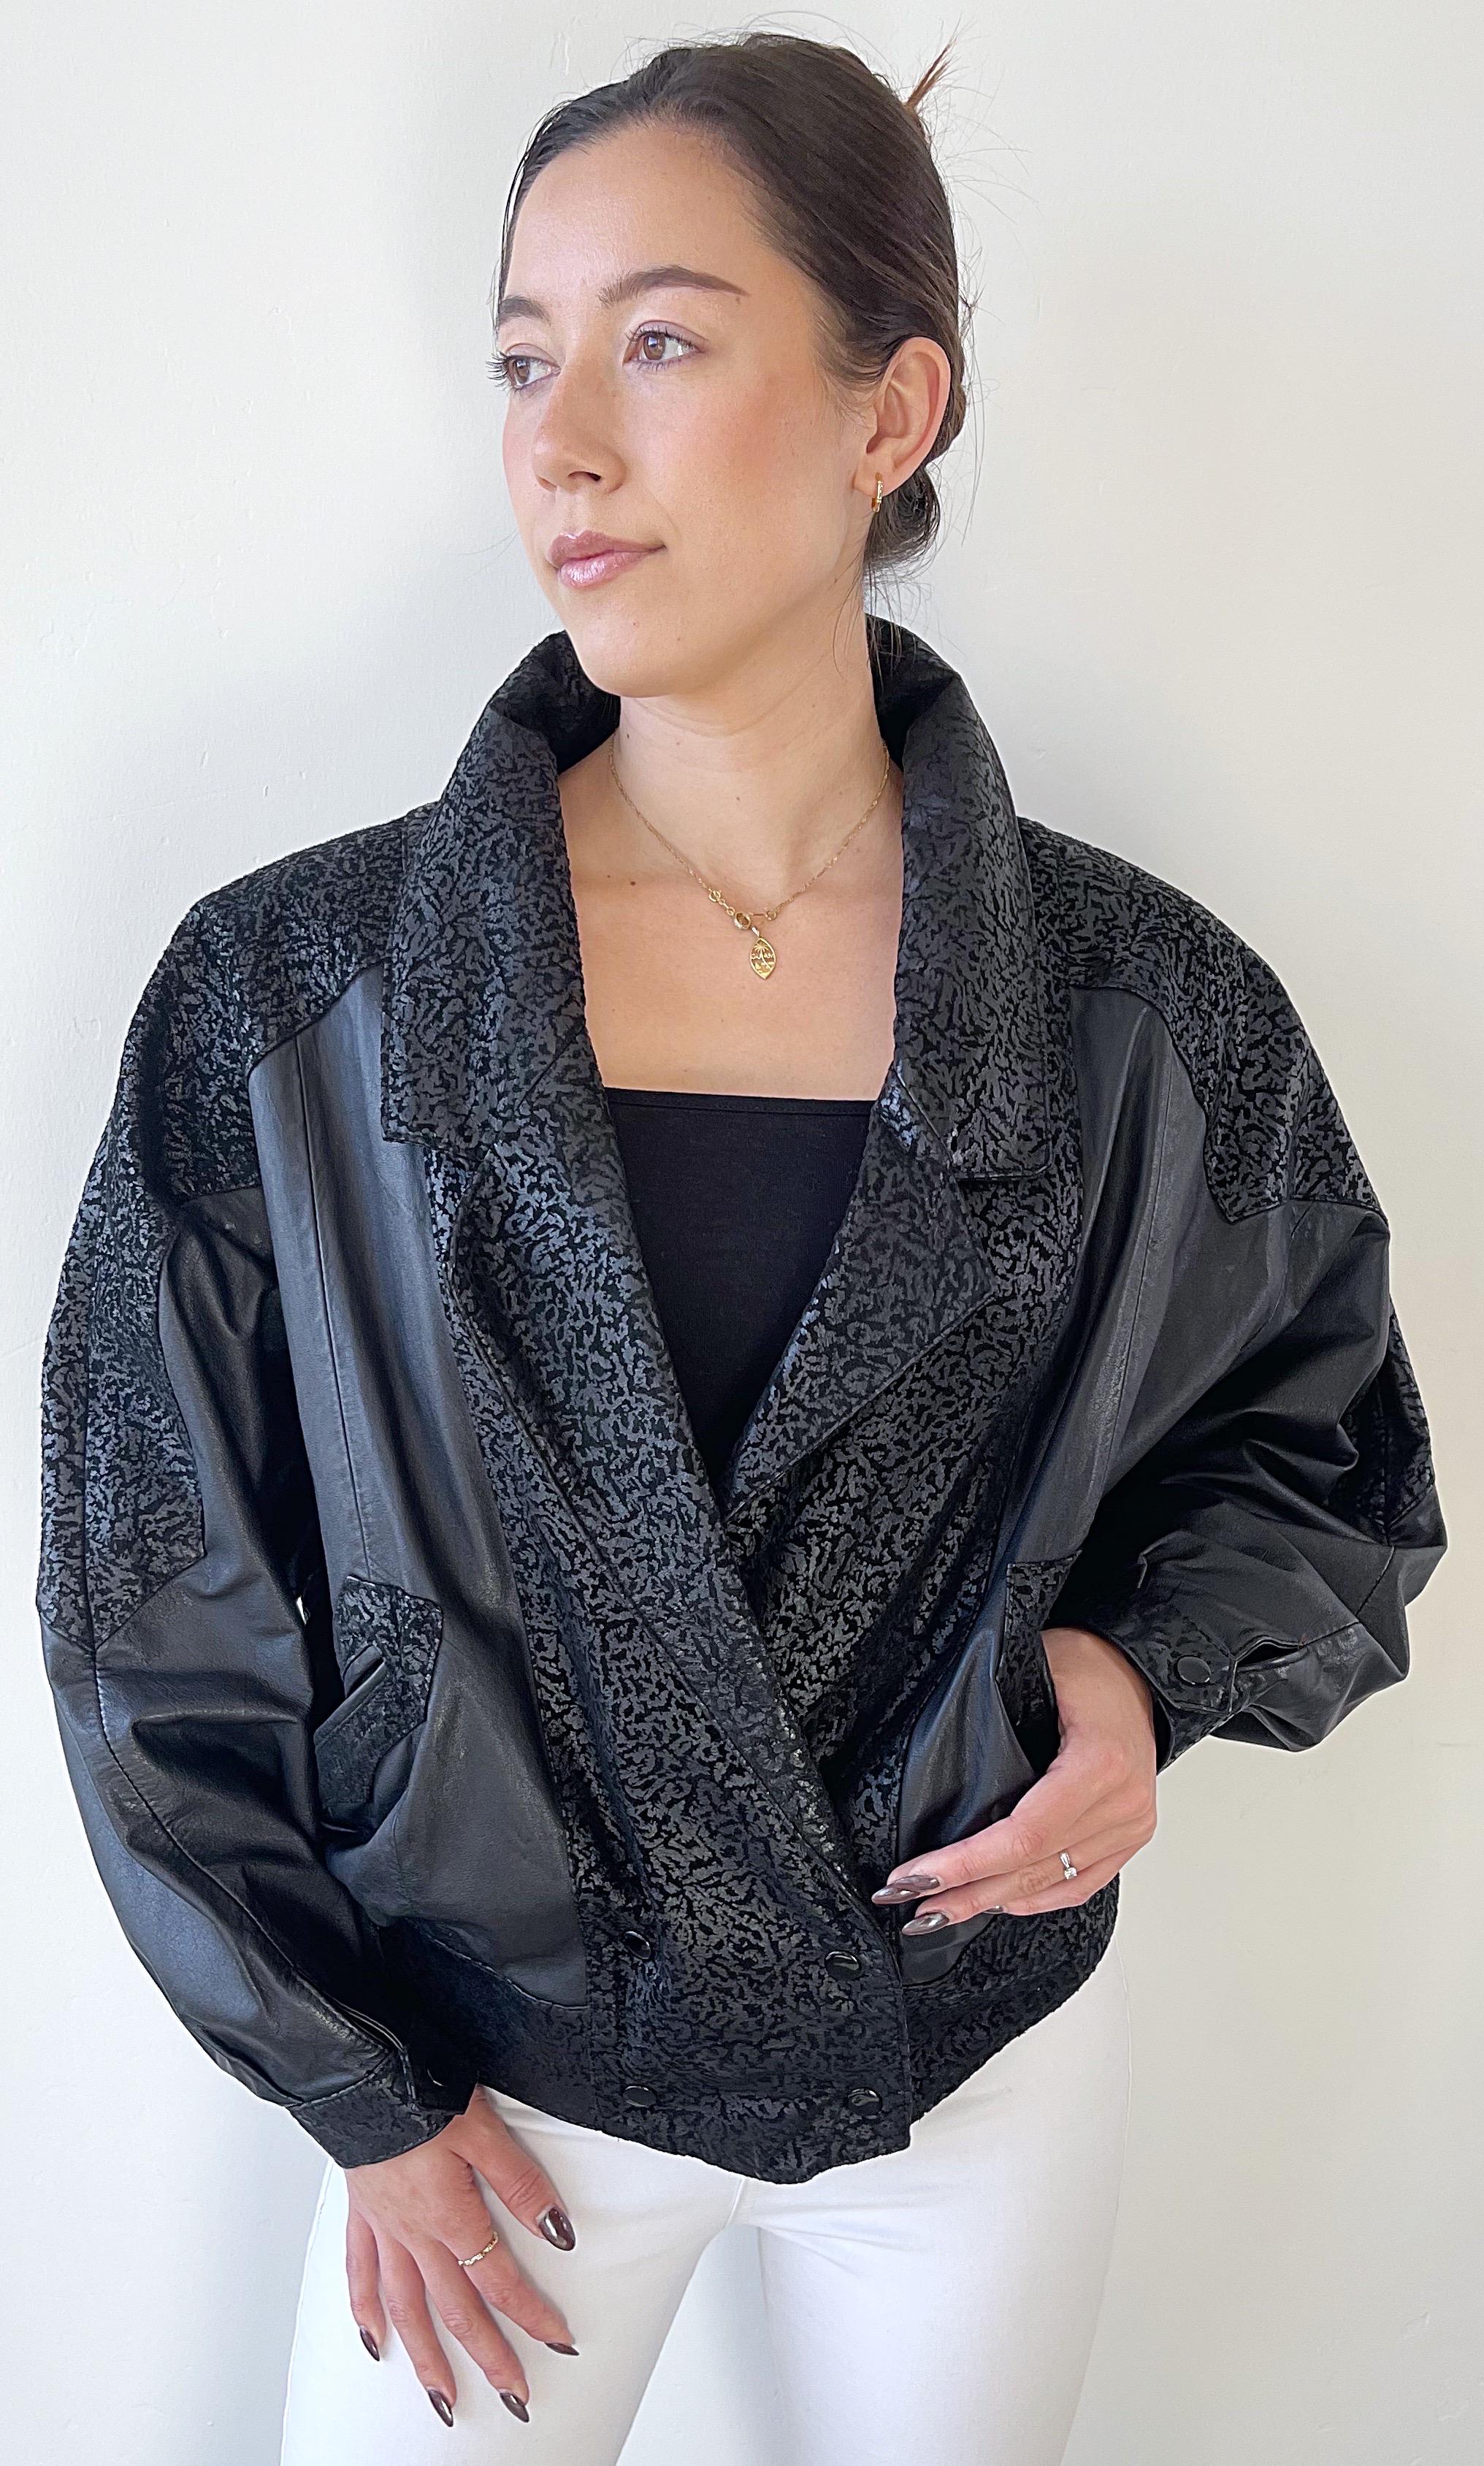 Amazing 1980s black embossed leather dolman sleeve jacket ! Features embossed leather along the collar, on top of the sleeves, and unique pattern on the back. Pockets at each side of the waist. Double breast style with four snaps at the waist. The